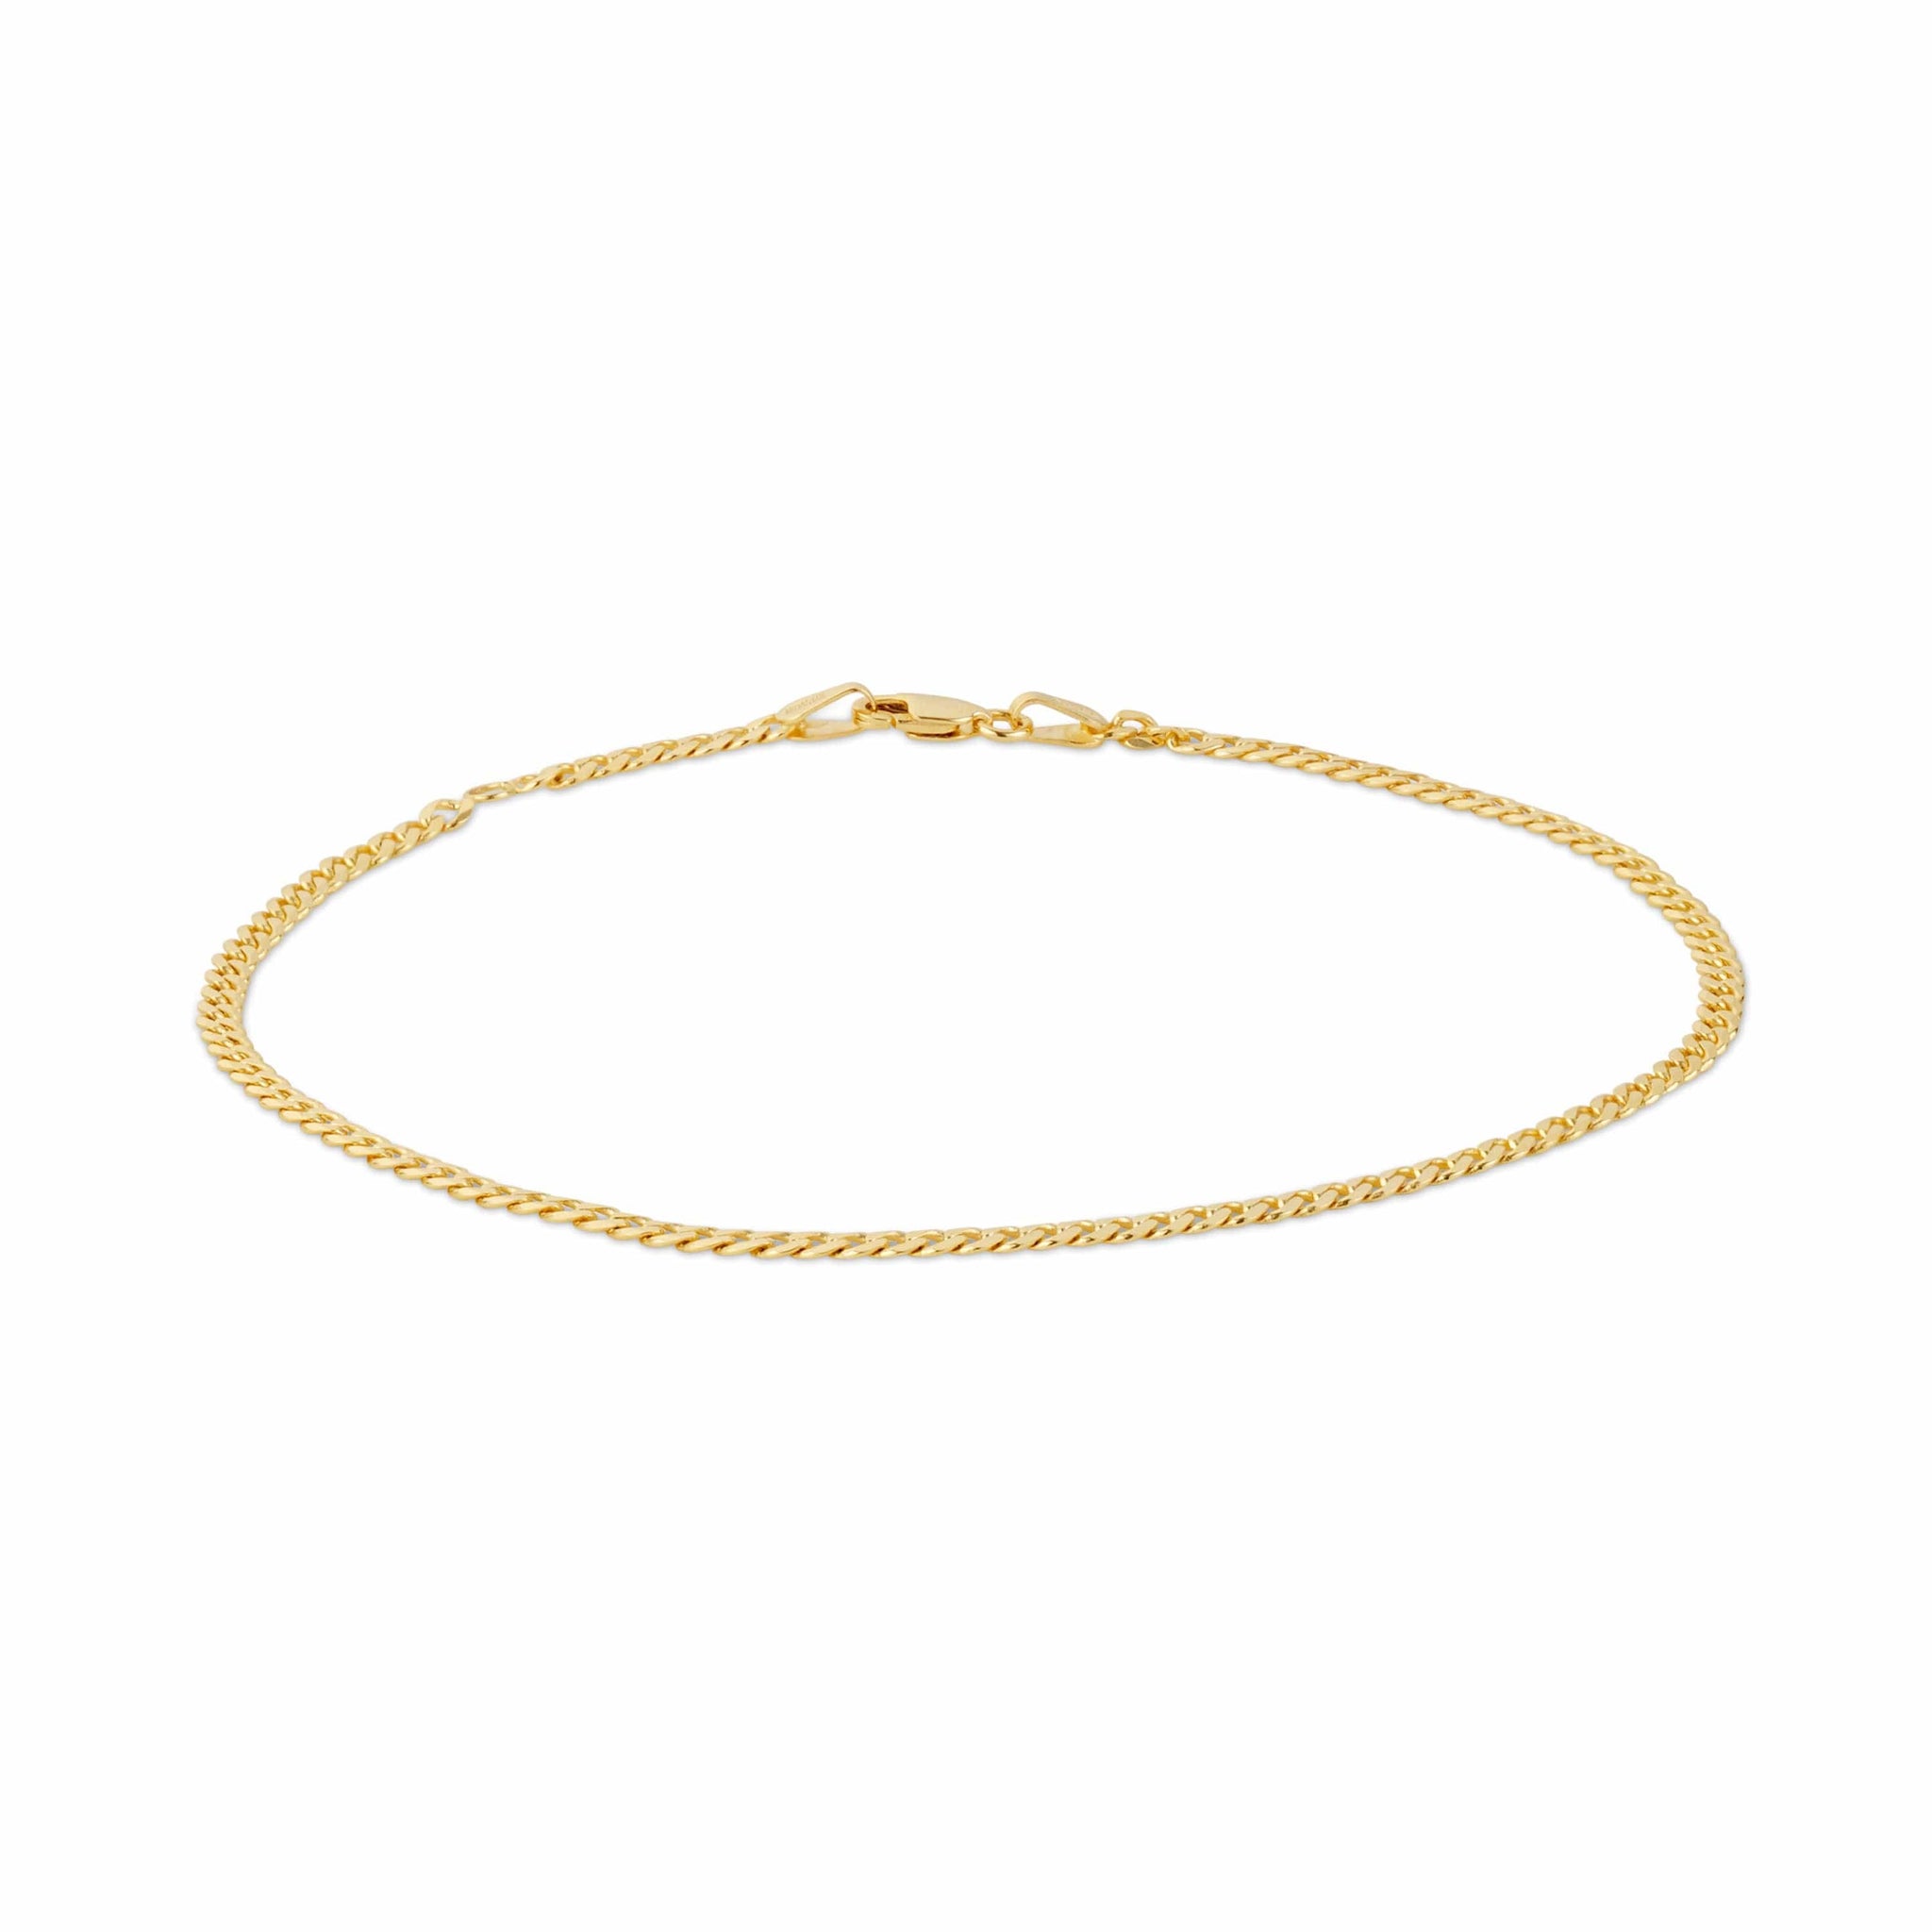 A gold curb link chain bracelet on a white backdrop.